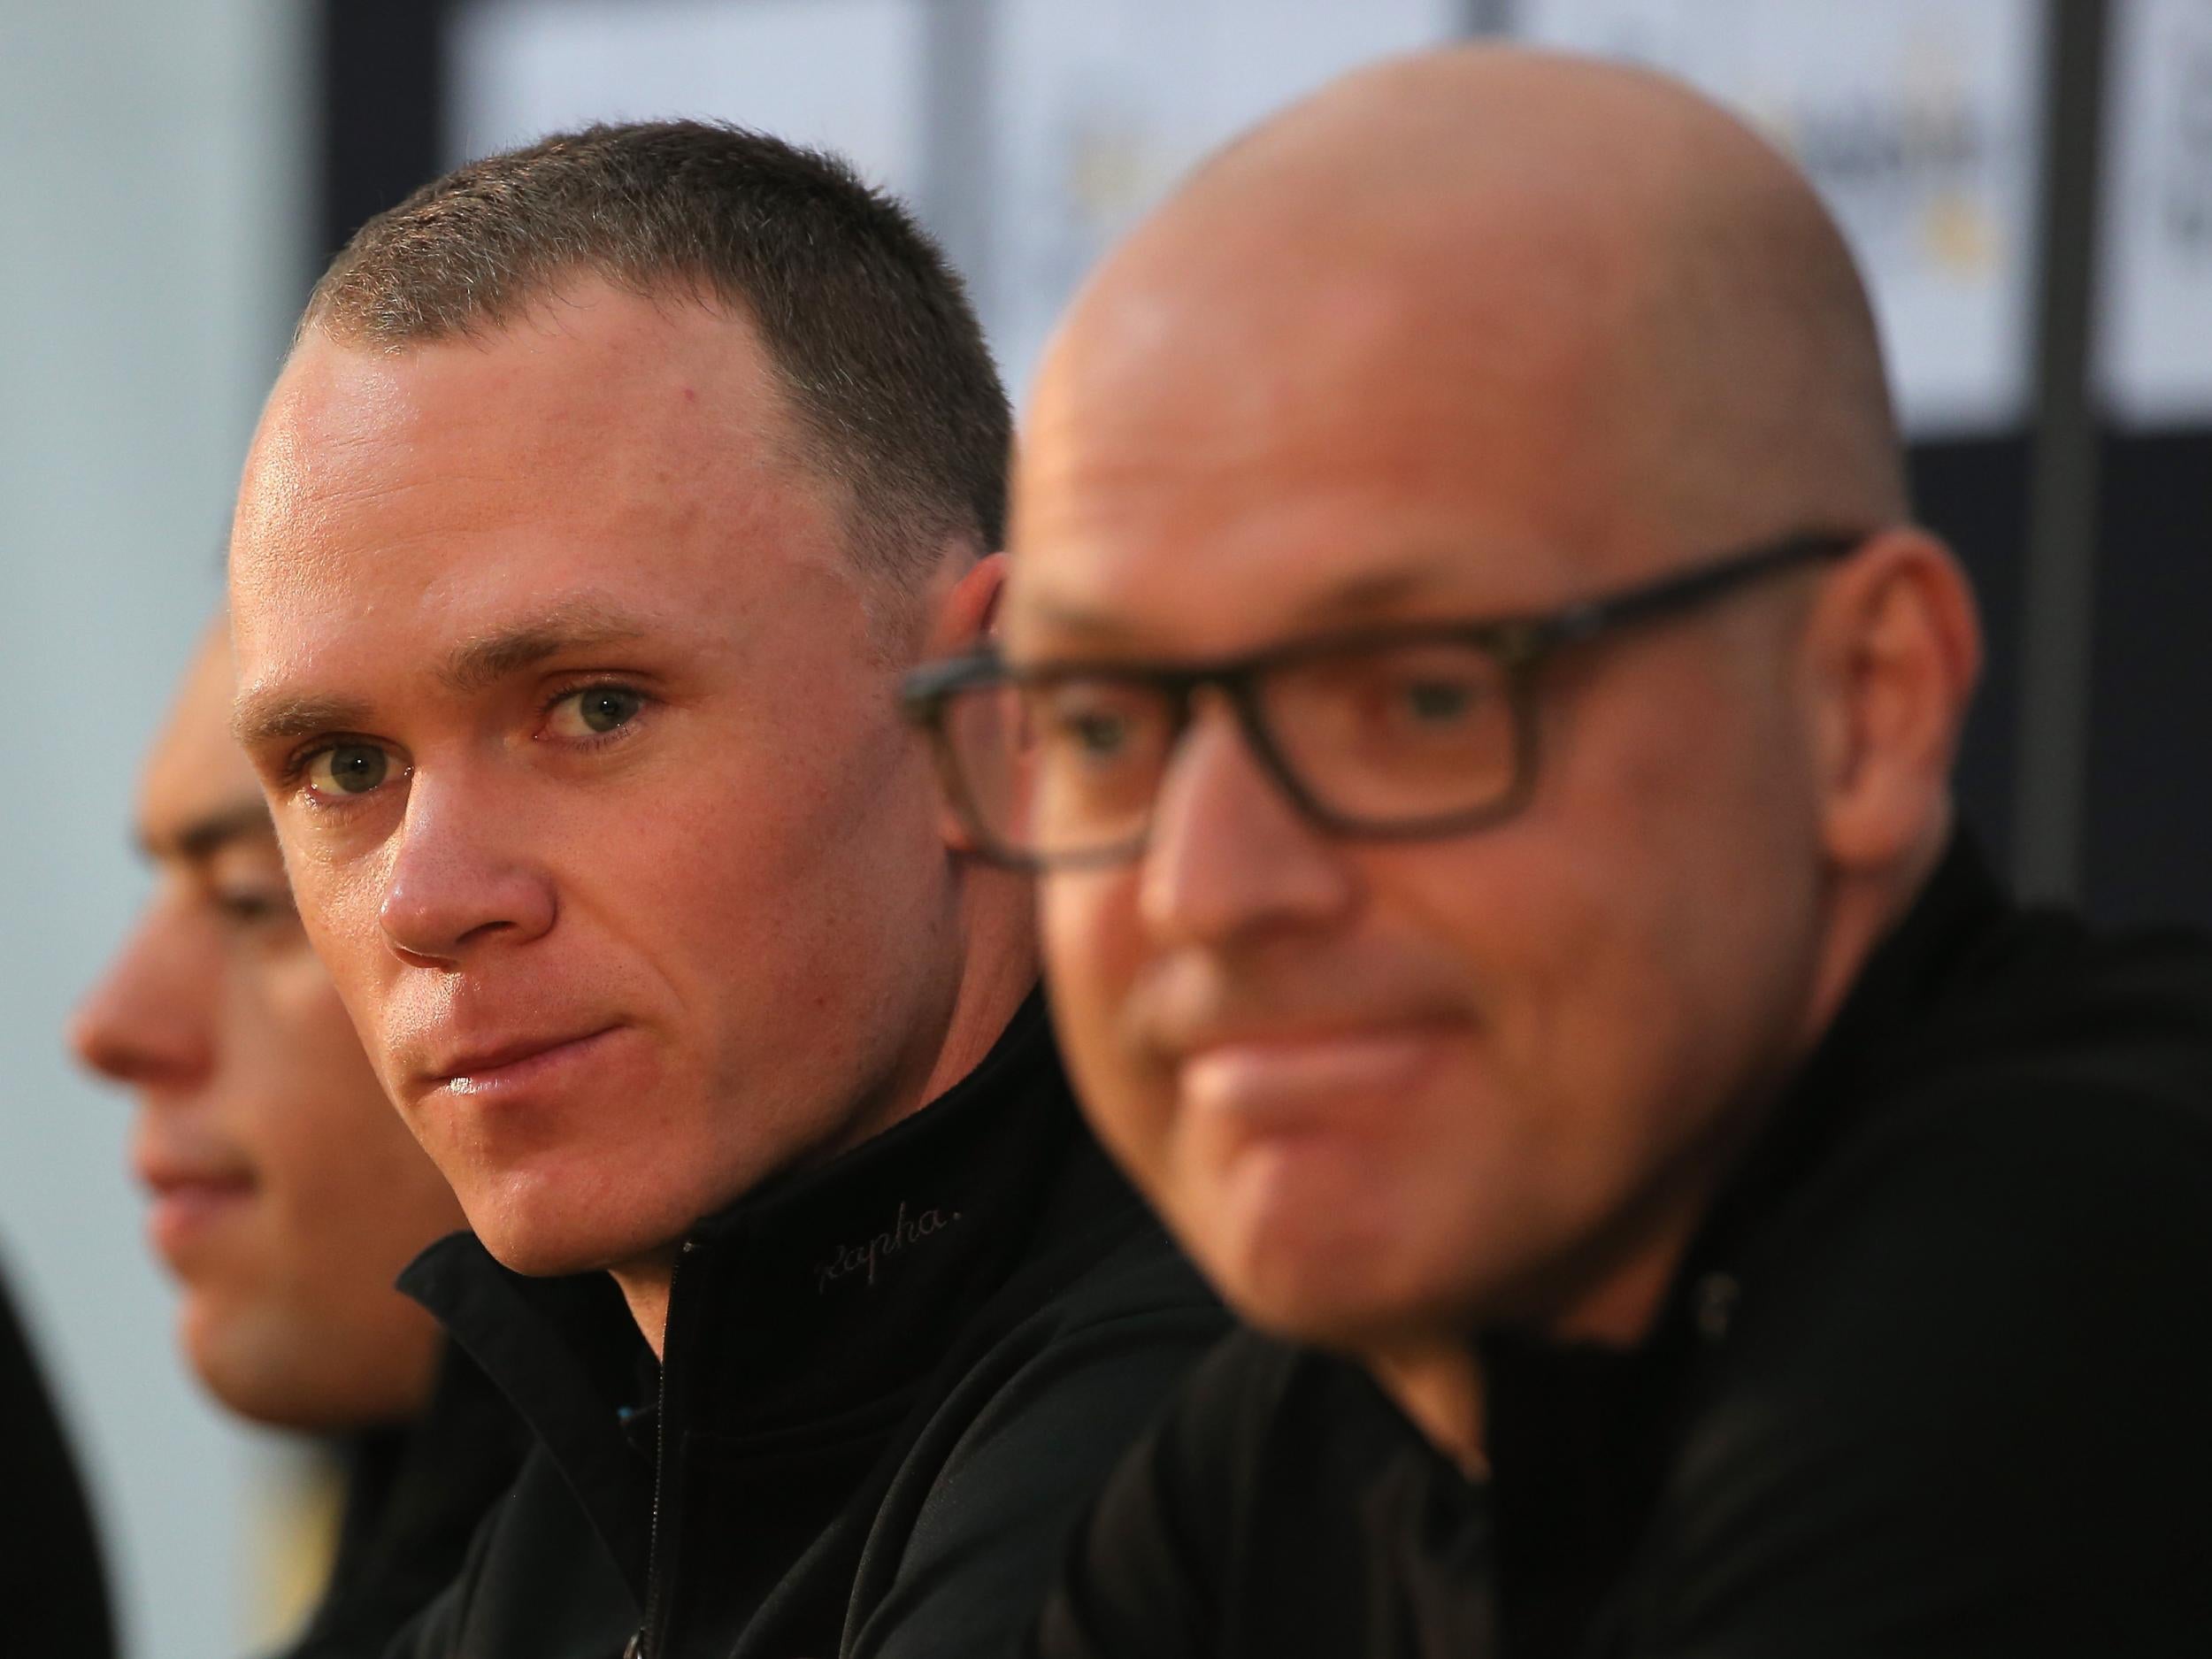 Froome has finally come out in support of Brailsford